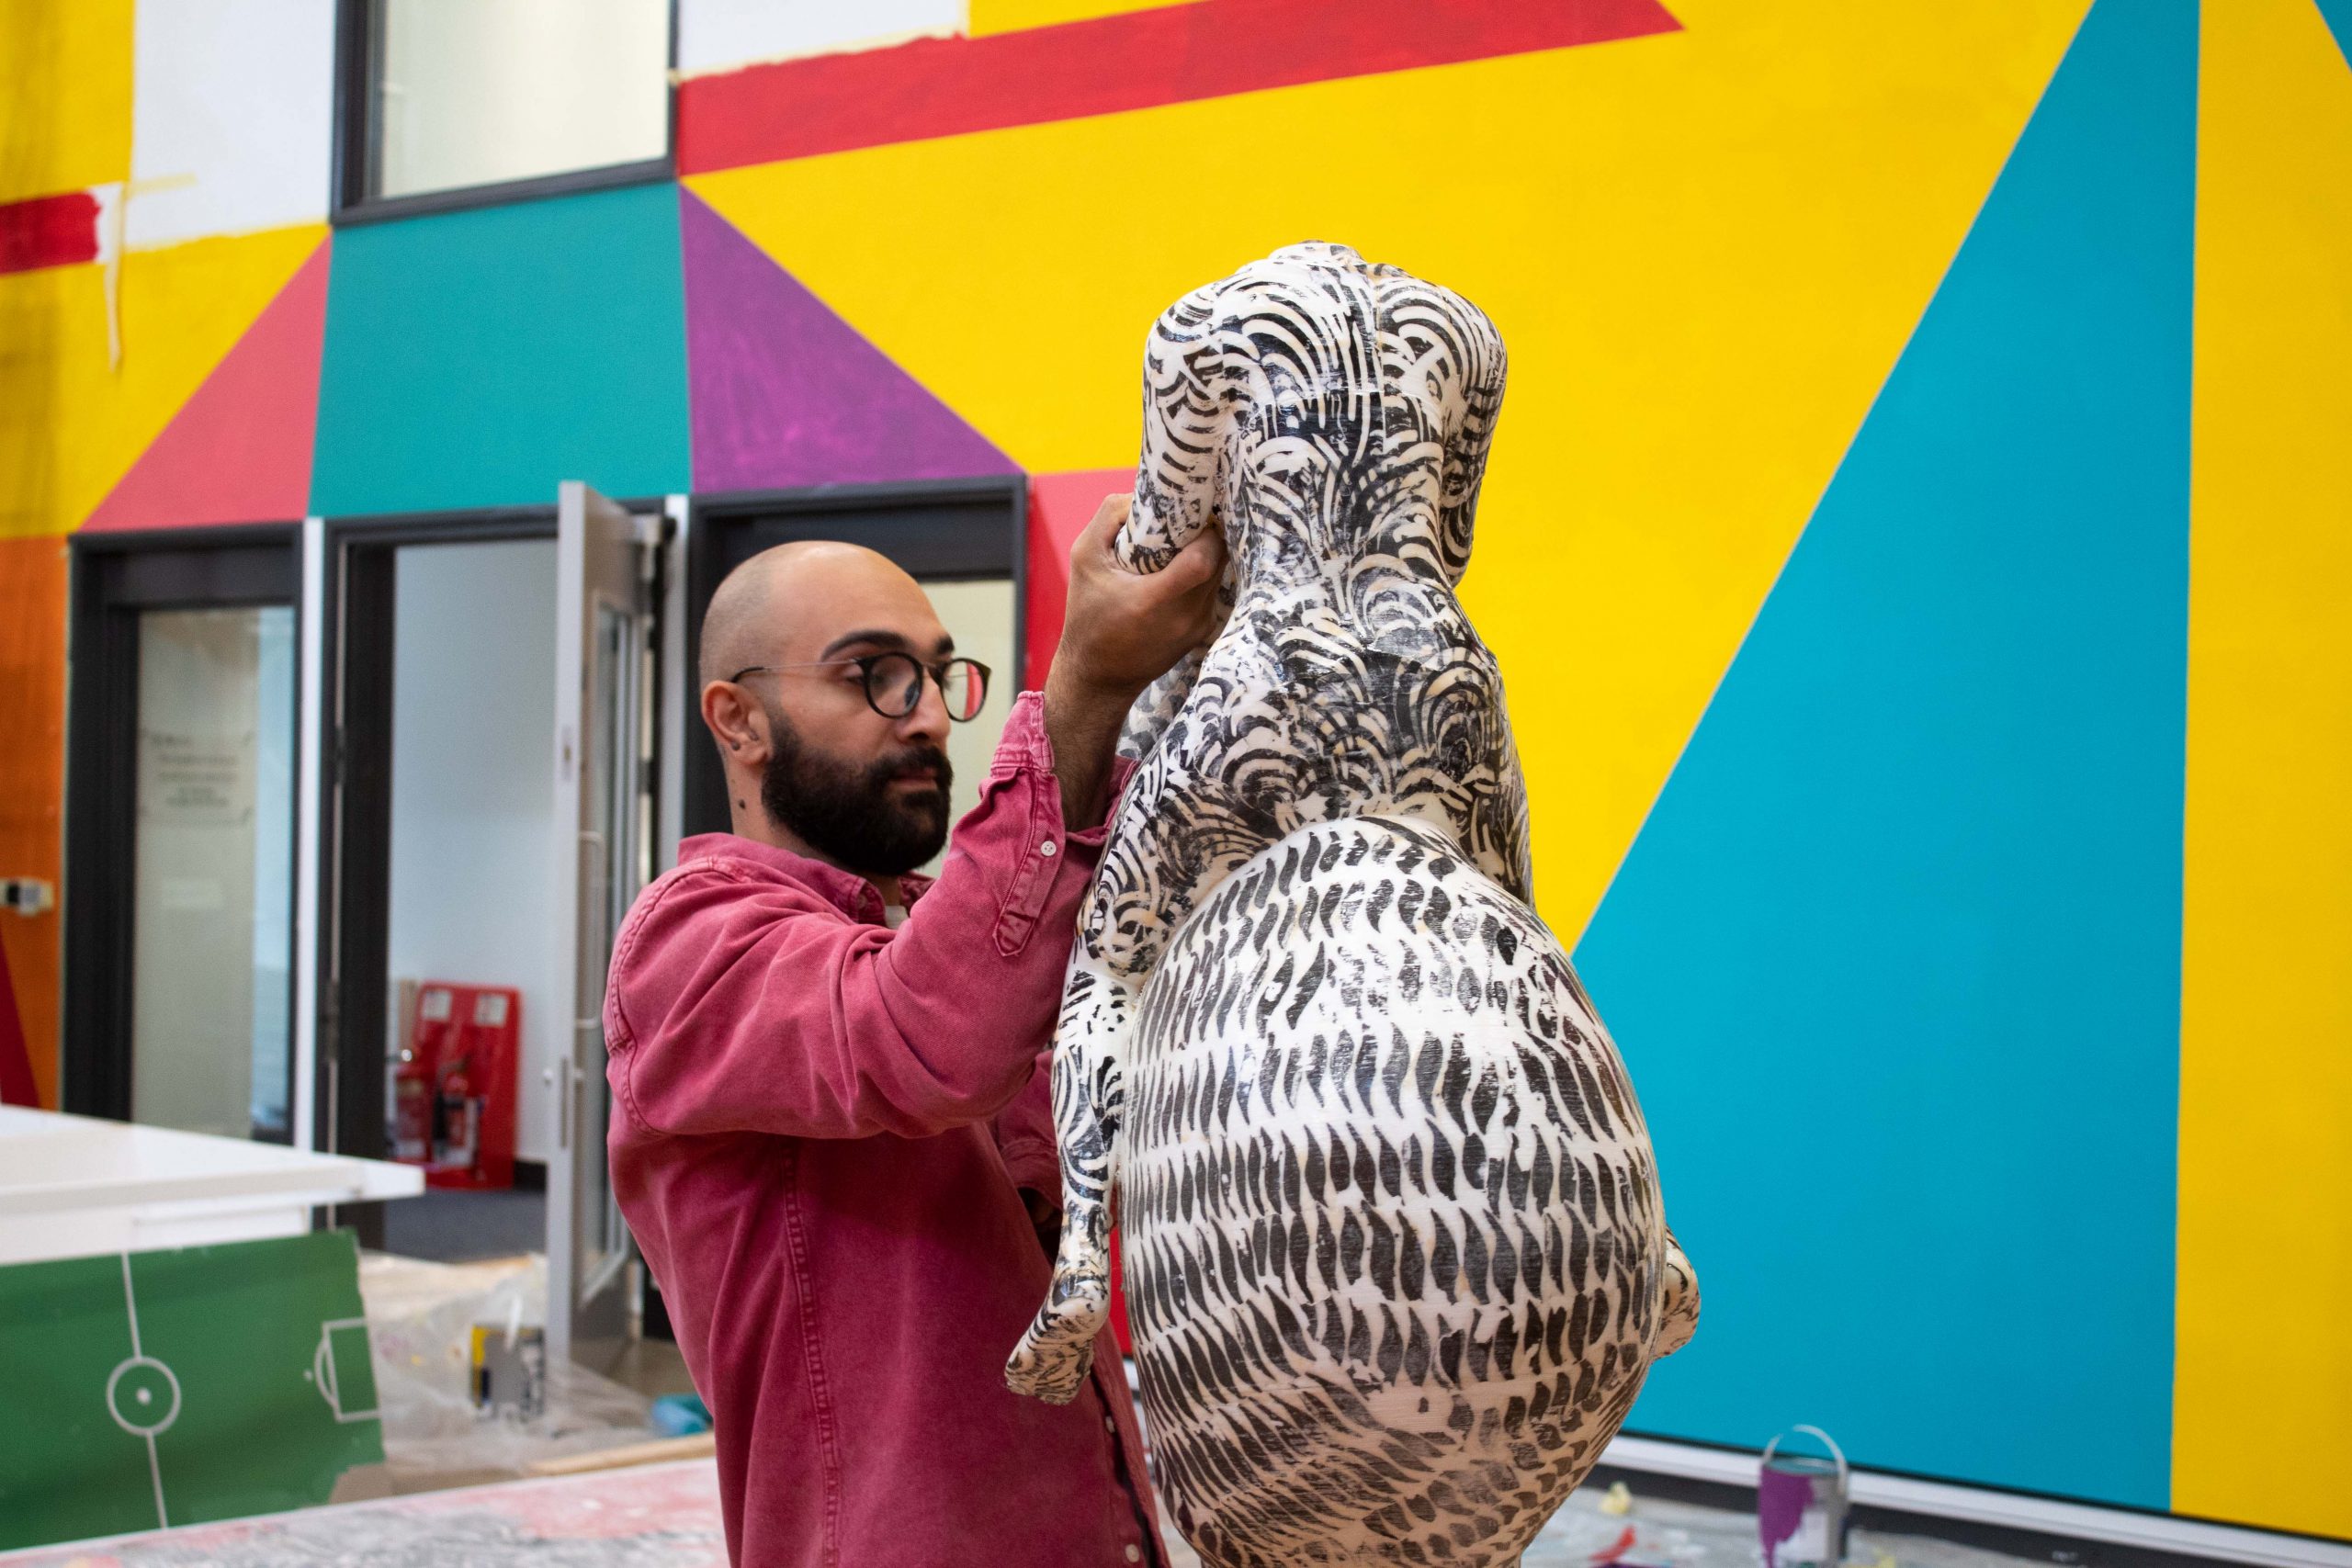 Mohammad Barrangi holding up a black and white sculpture, with bright coloured walls behind him.